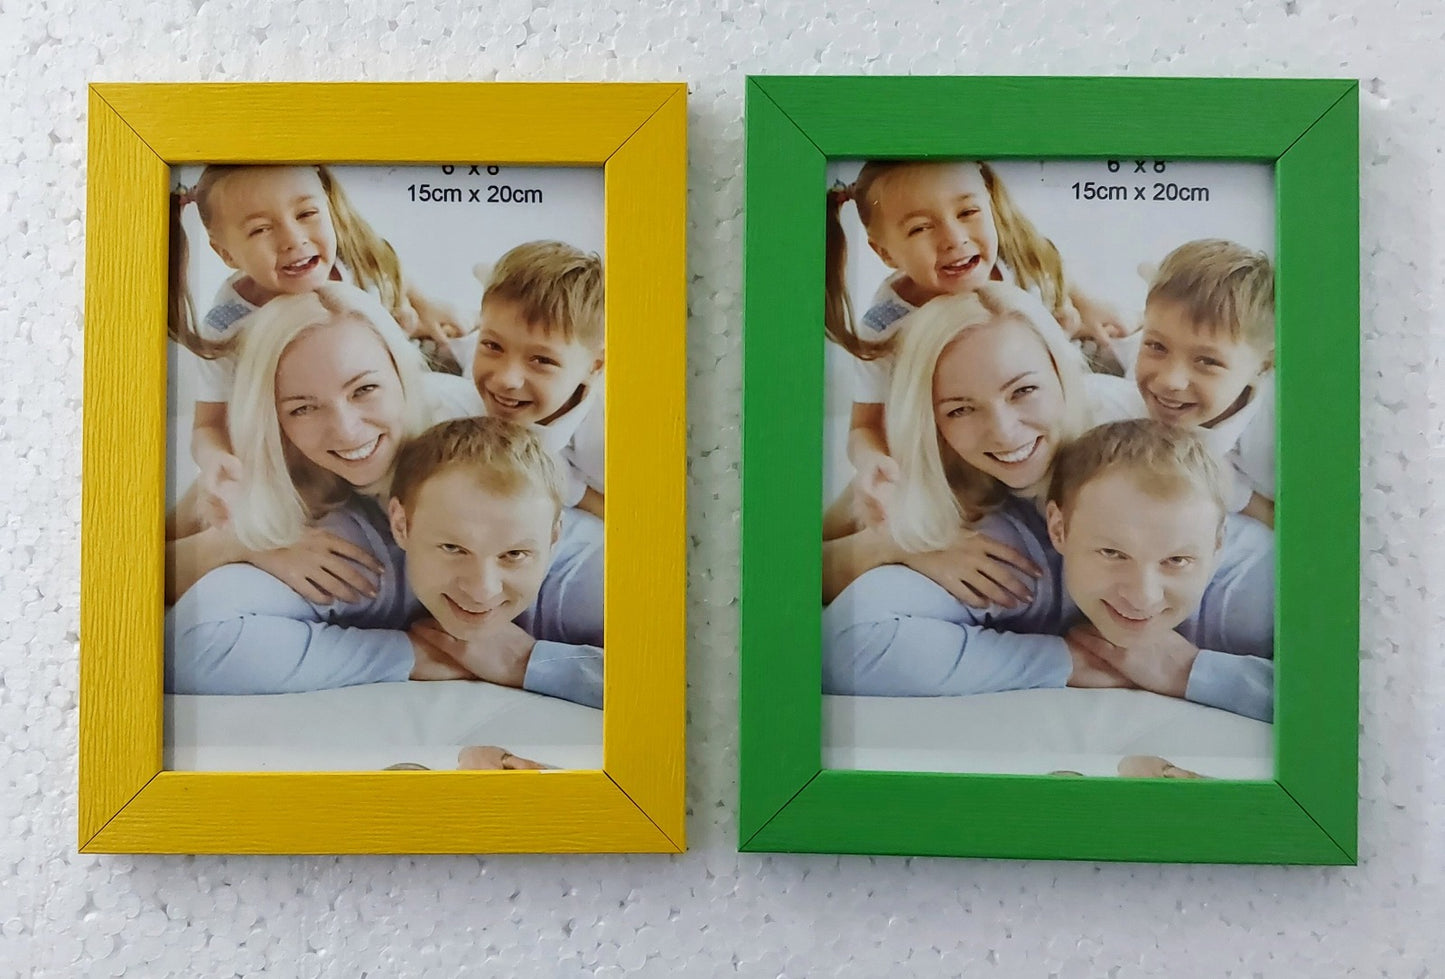 Photo frame 6x8 Inch Color Glass & Synthetic Wood Modern Photo Frames for Table and Wall Hanging ( 1 Pcs )